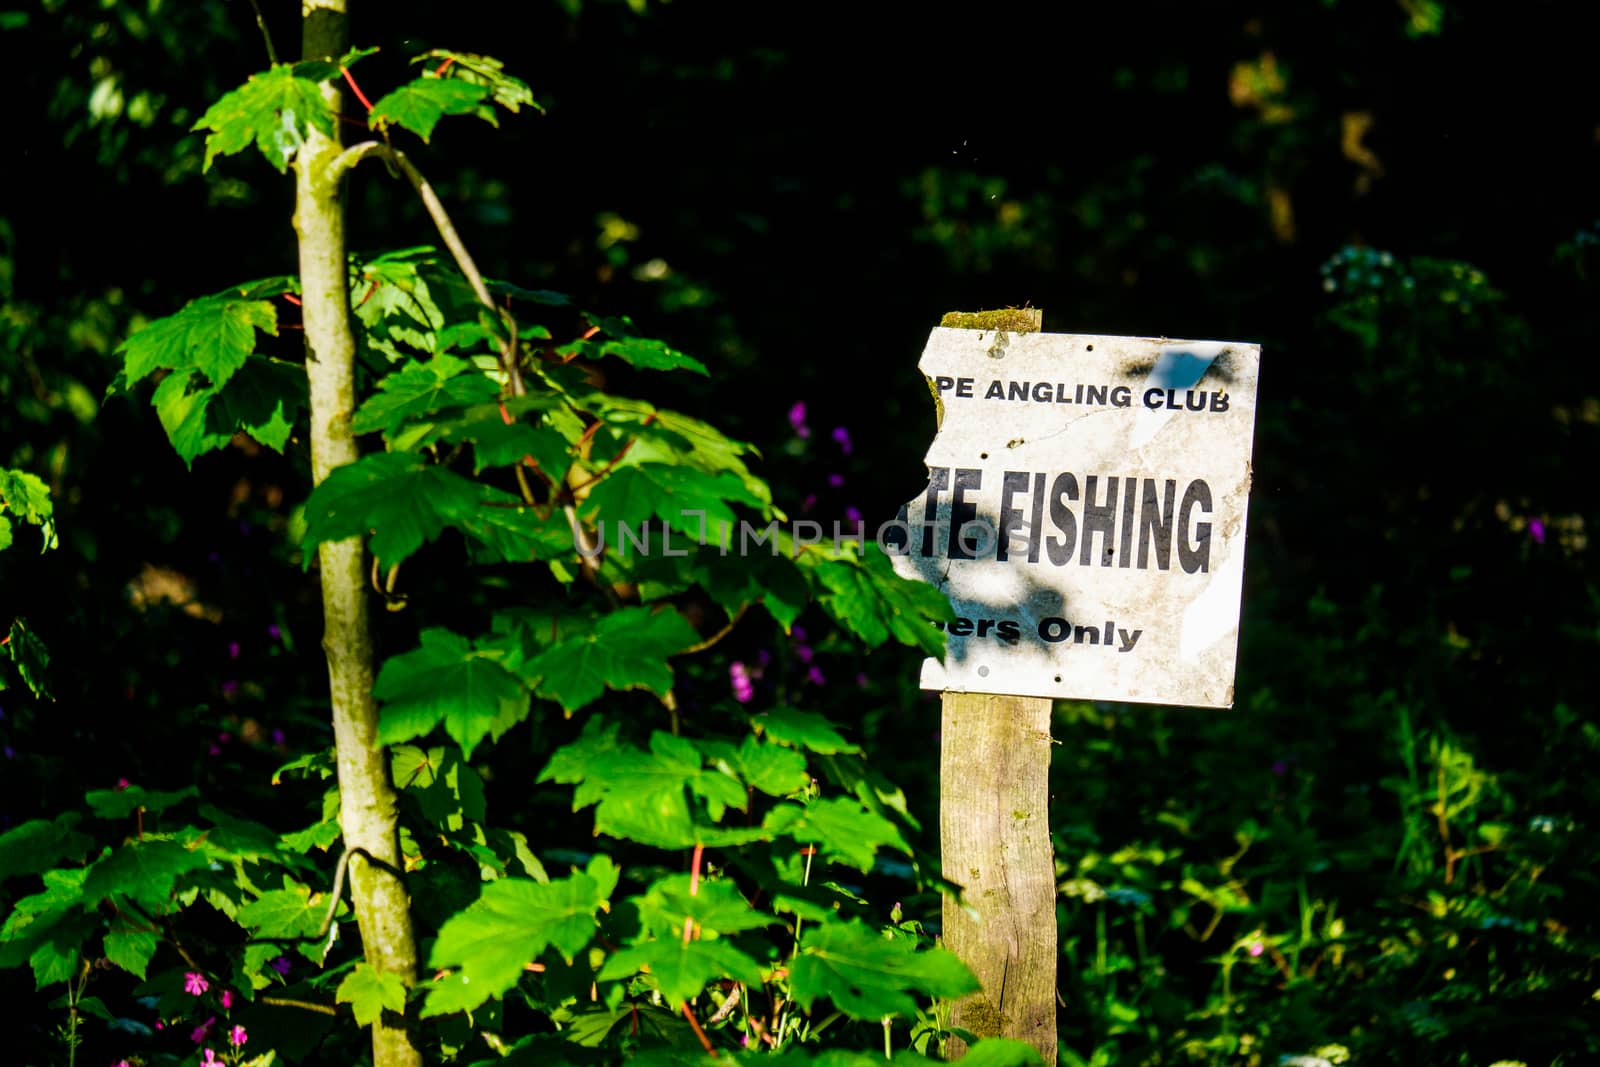 Private Fishing Sign Surrounded by Leaves